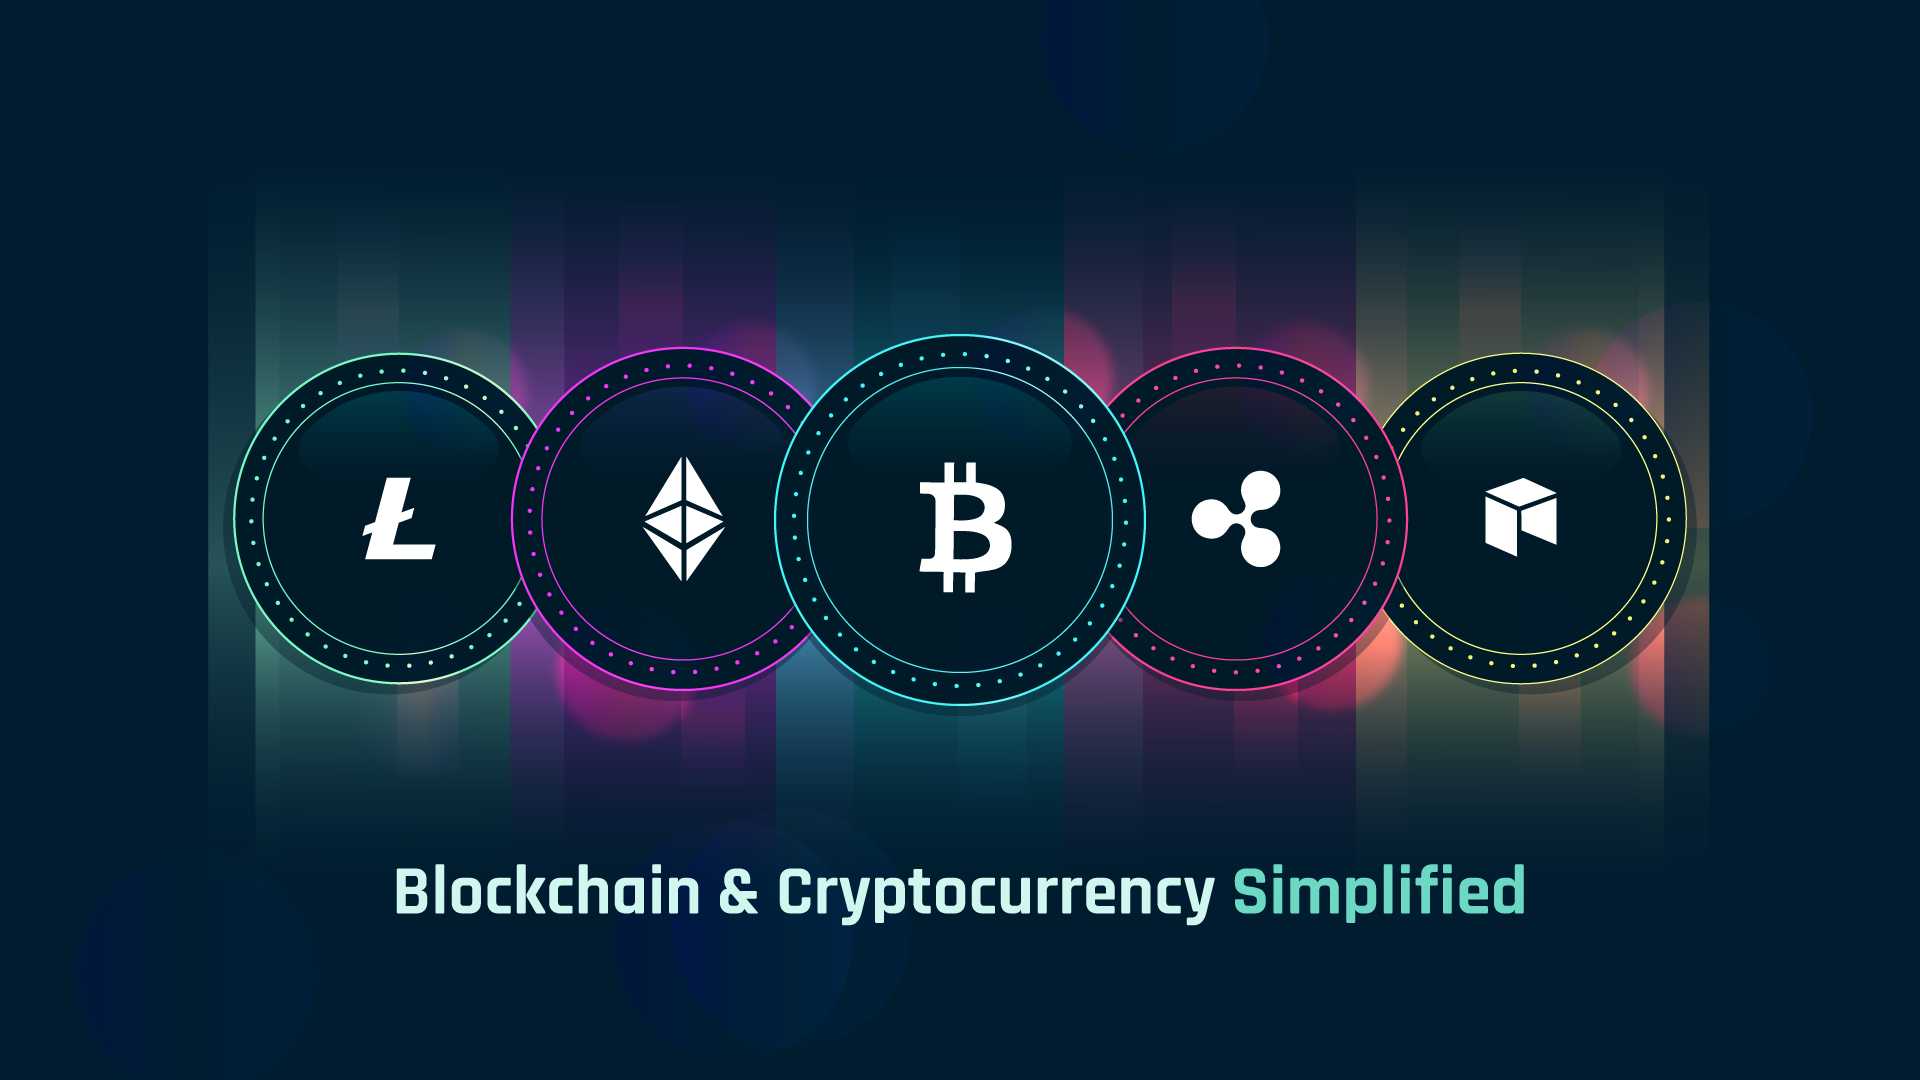 Block chain and cryptocurrency simplified using explainer video